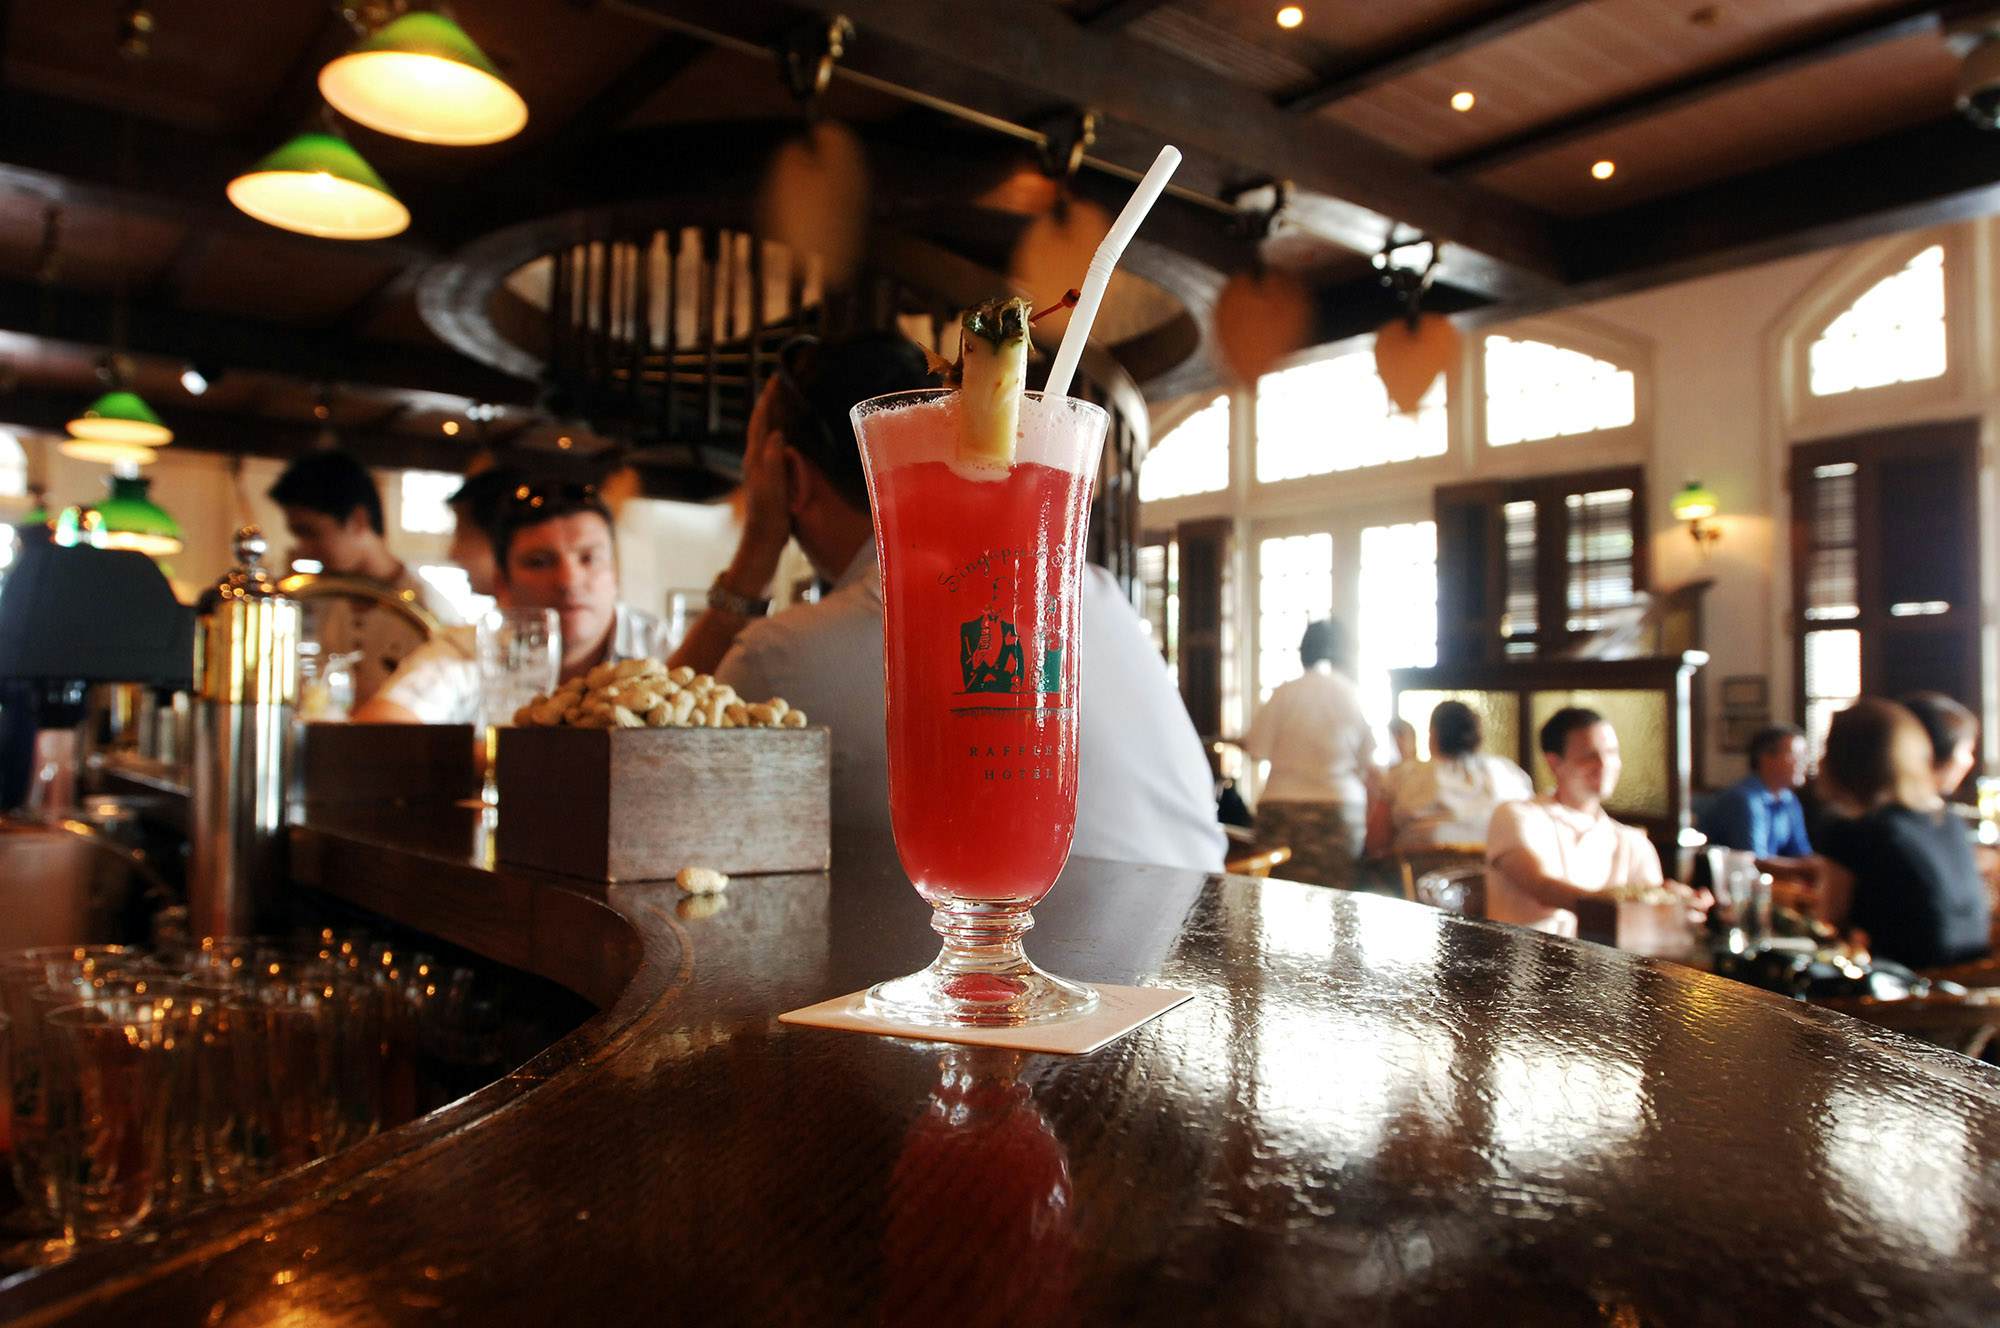 Raffles Hotel’s iconic Singapore Sling returns home to the Long Bar